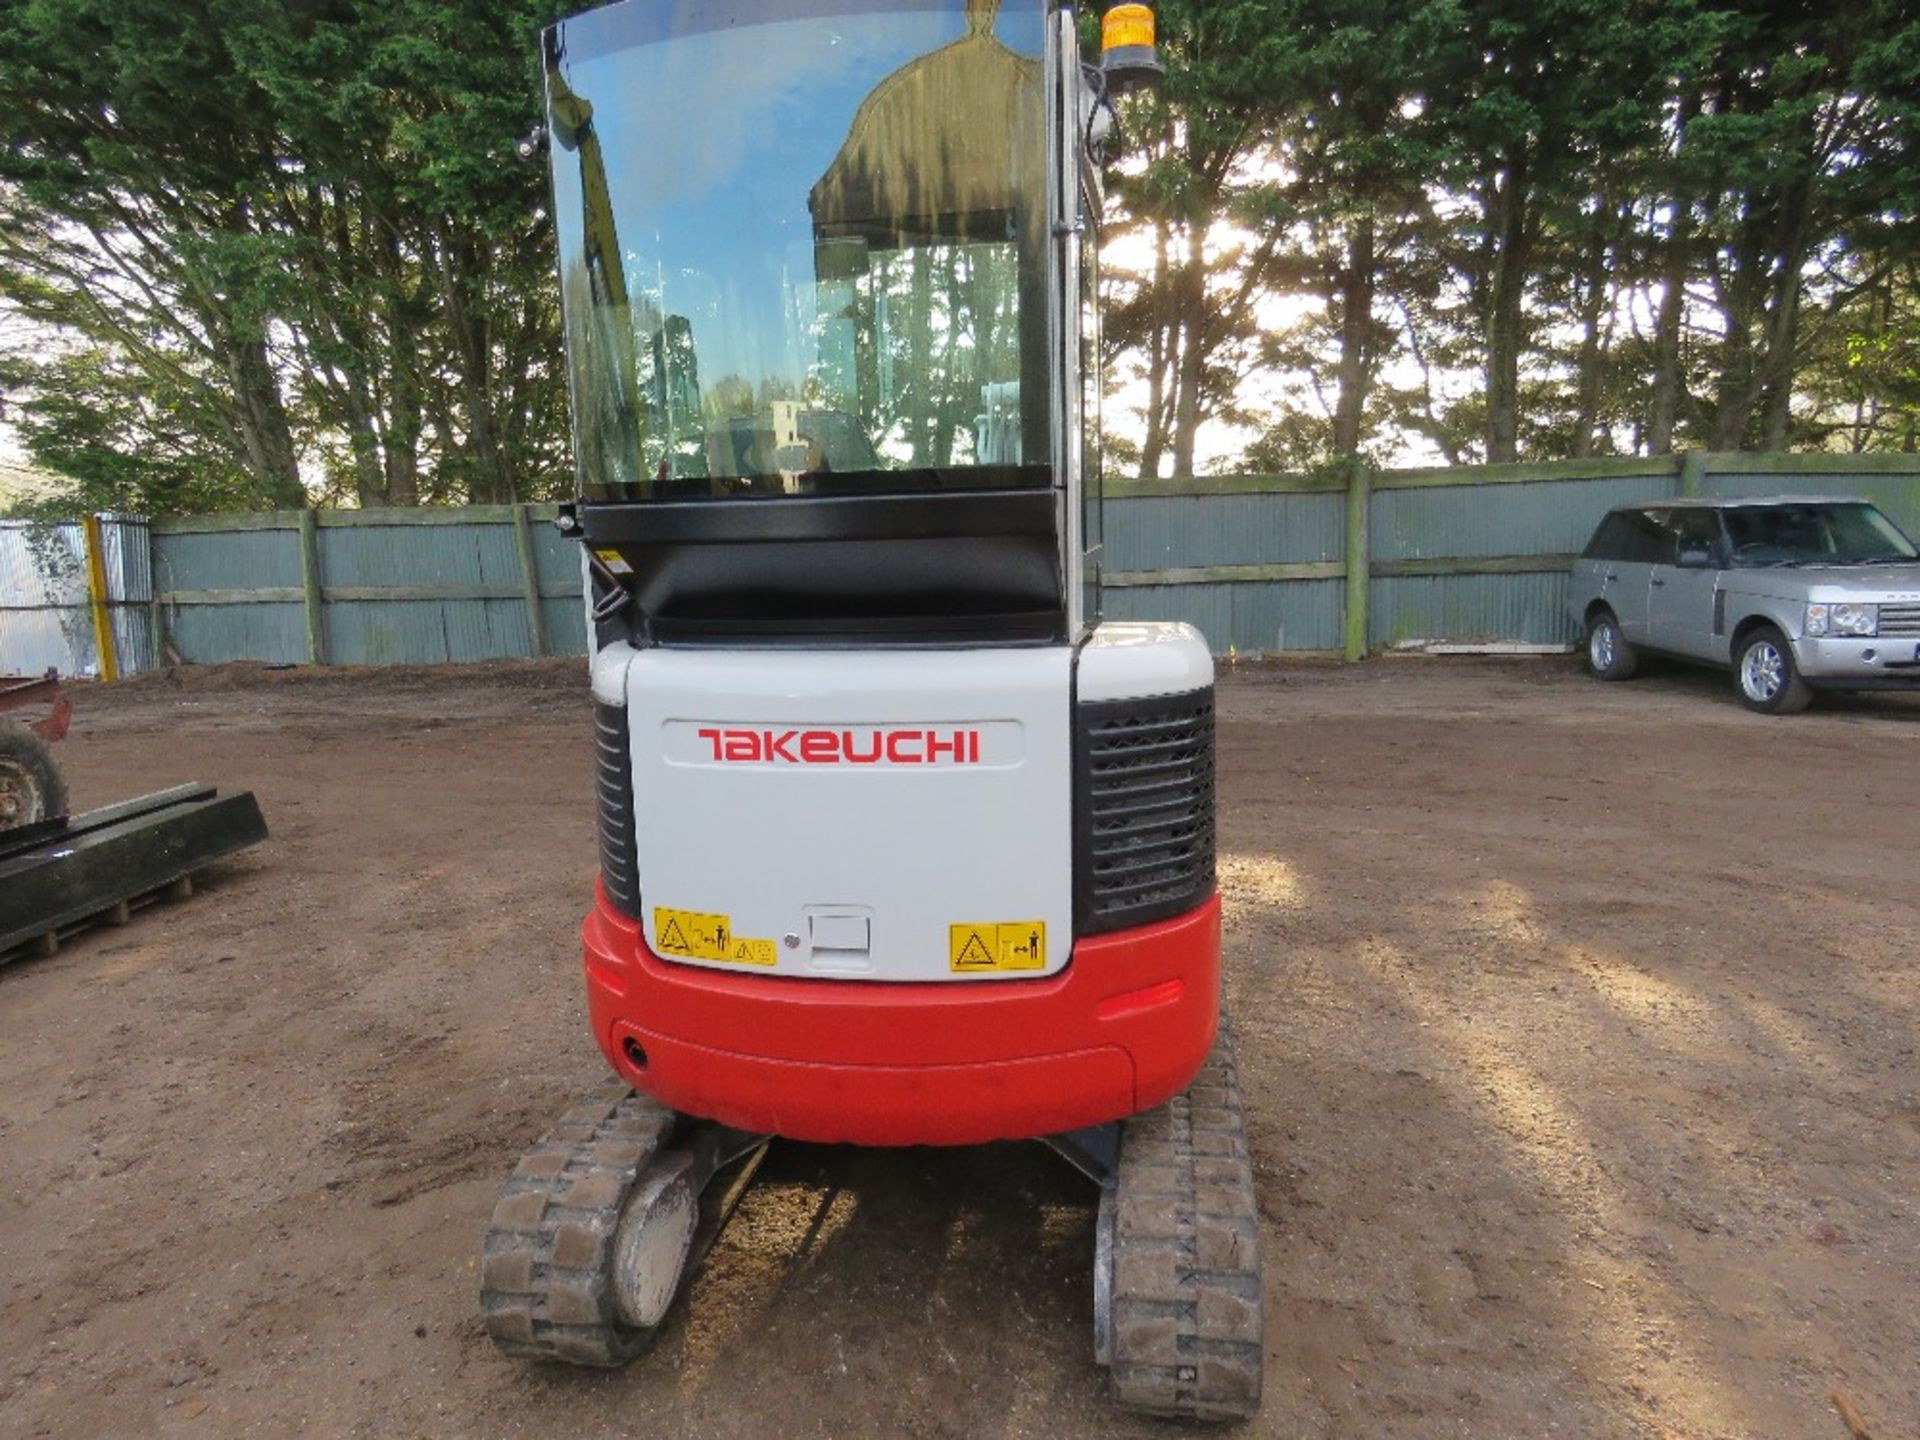 TAKEUCHI TB23R ZERO SWING EXCAVATOR, YEAR 2019. 1243 REC HOURS. 2 X BUCKETS. 2670KG OPERATING WEIGHT - Image 4 of 10